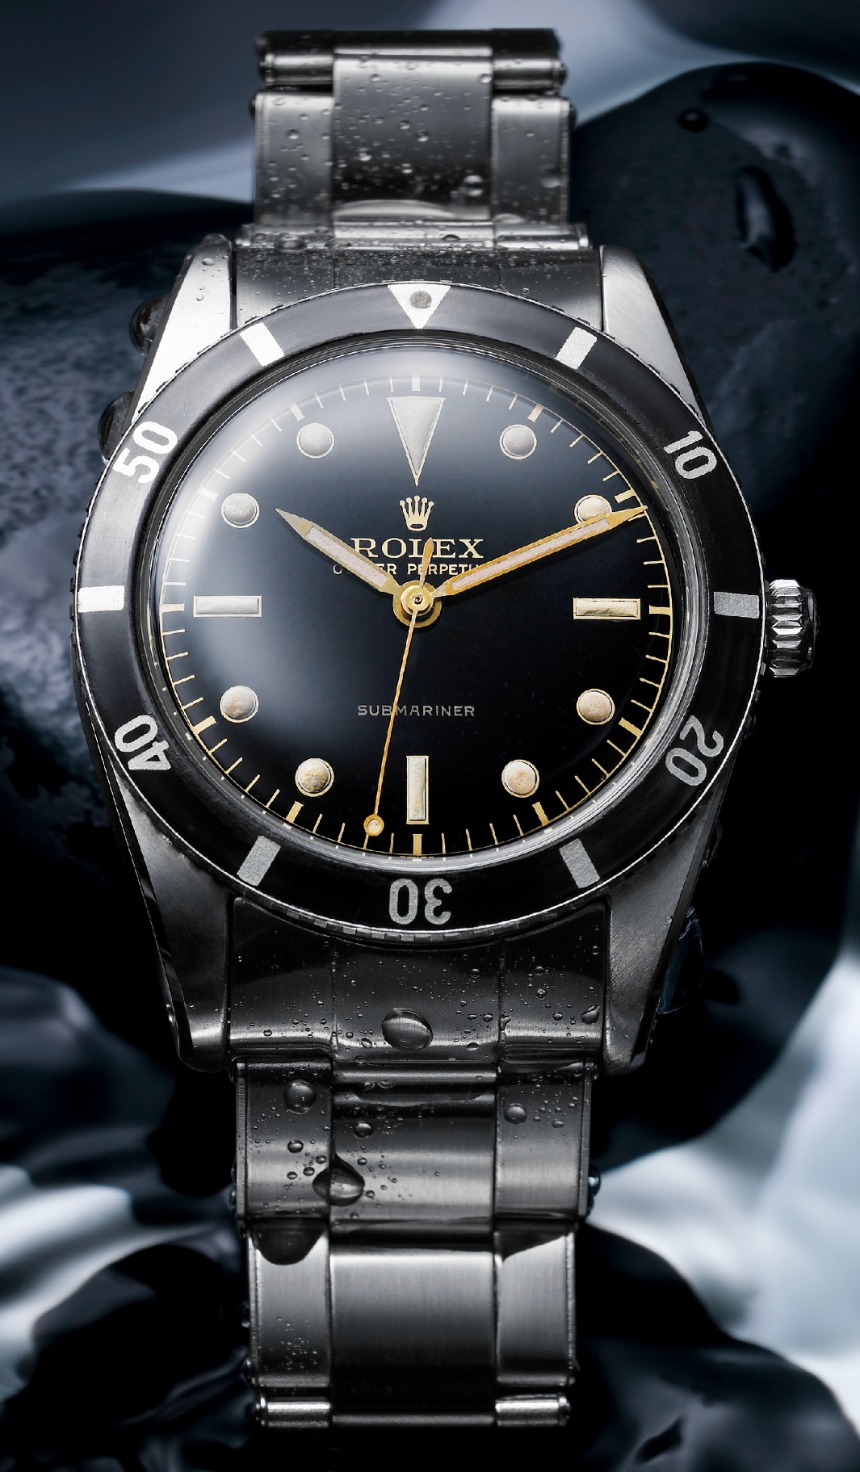 when was the rolex submariner first made